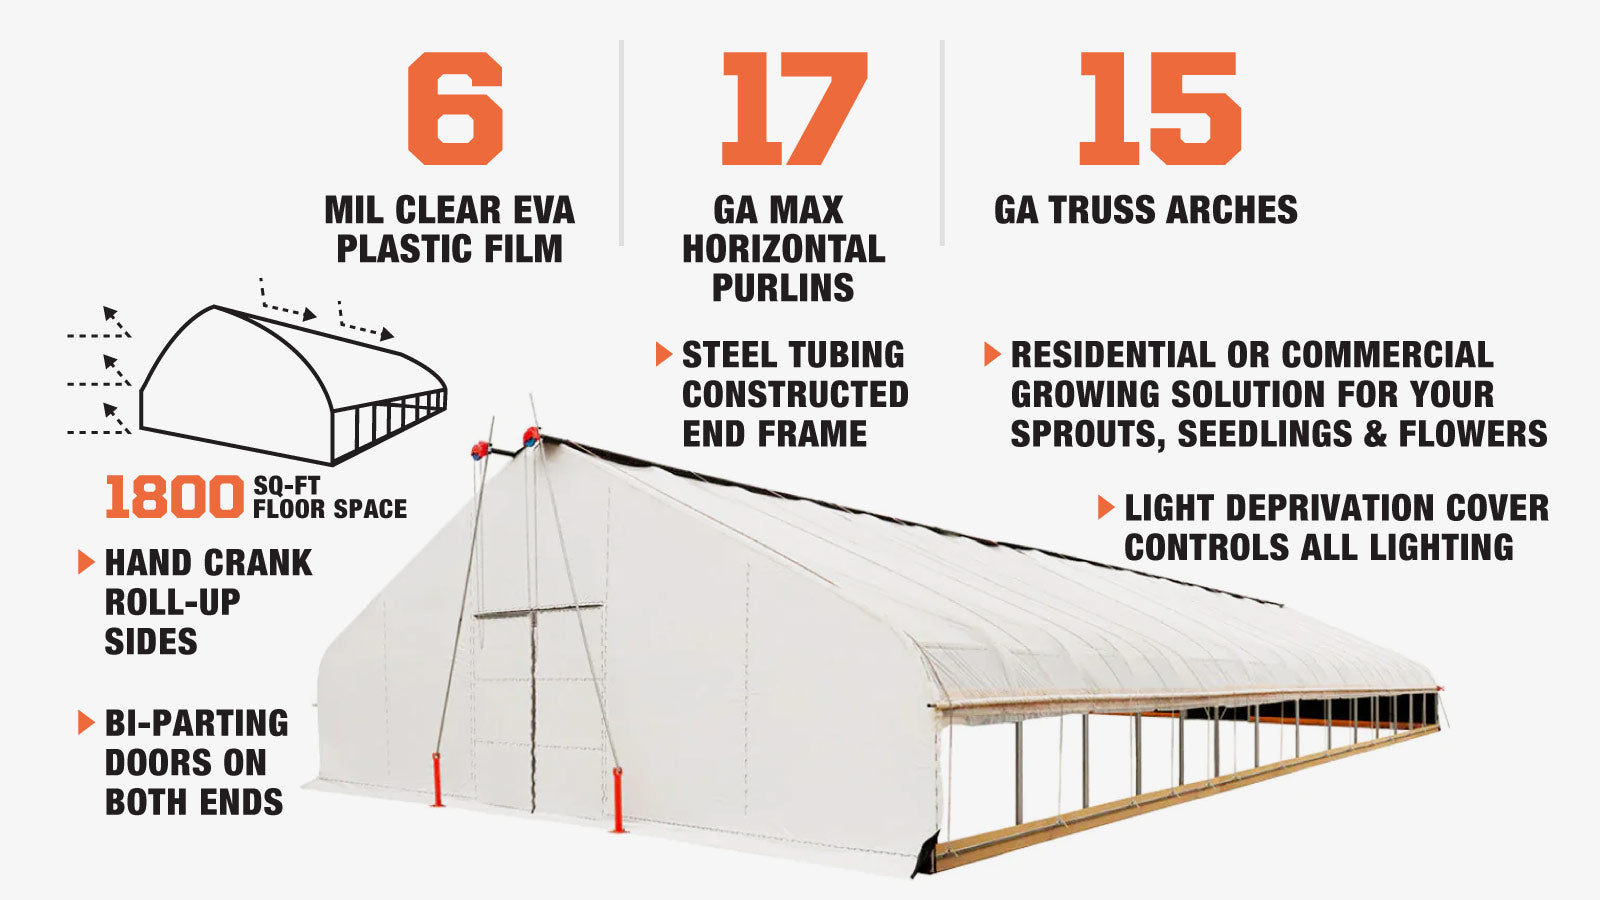 TMG Industrial Pro Series 30’ x 60’ Light Deprivation Two Layer Cover Greenhouse Grow Tent, 6-mil Blackout Tarp and Clear Film, Cold Frame, Hand Crank Roll-Up Sides, Peak Ceiling Roof, TMG-GHD3060-description-image